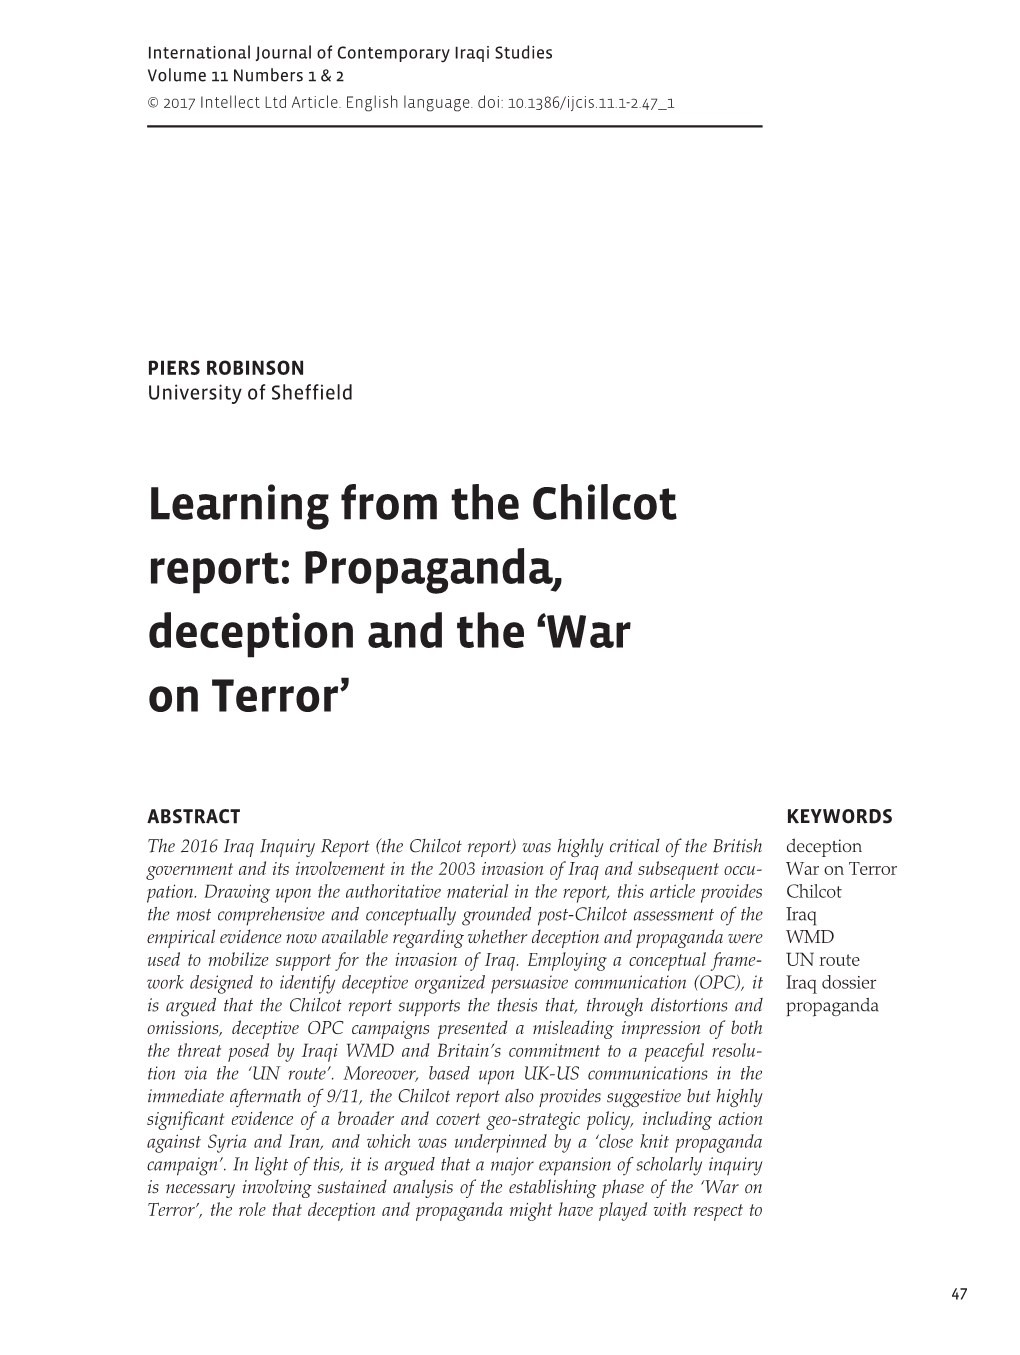 Learning from the Chilcot Report: Propaganda, Deception and the Â